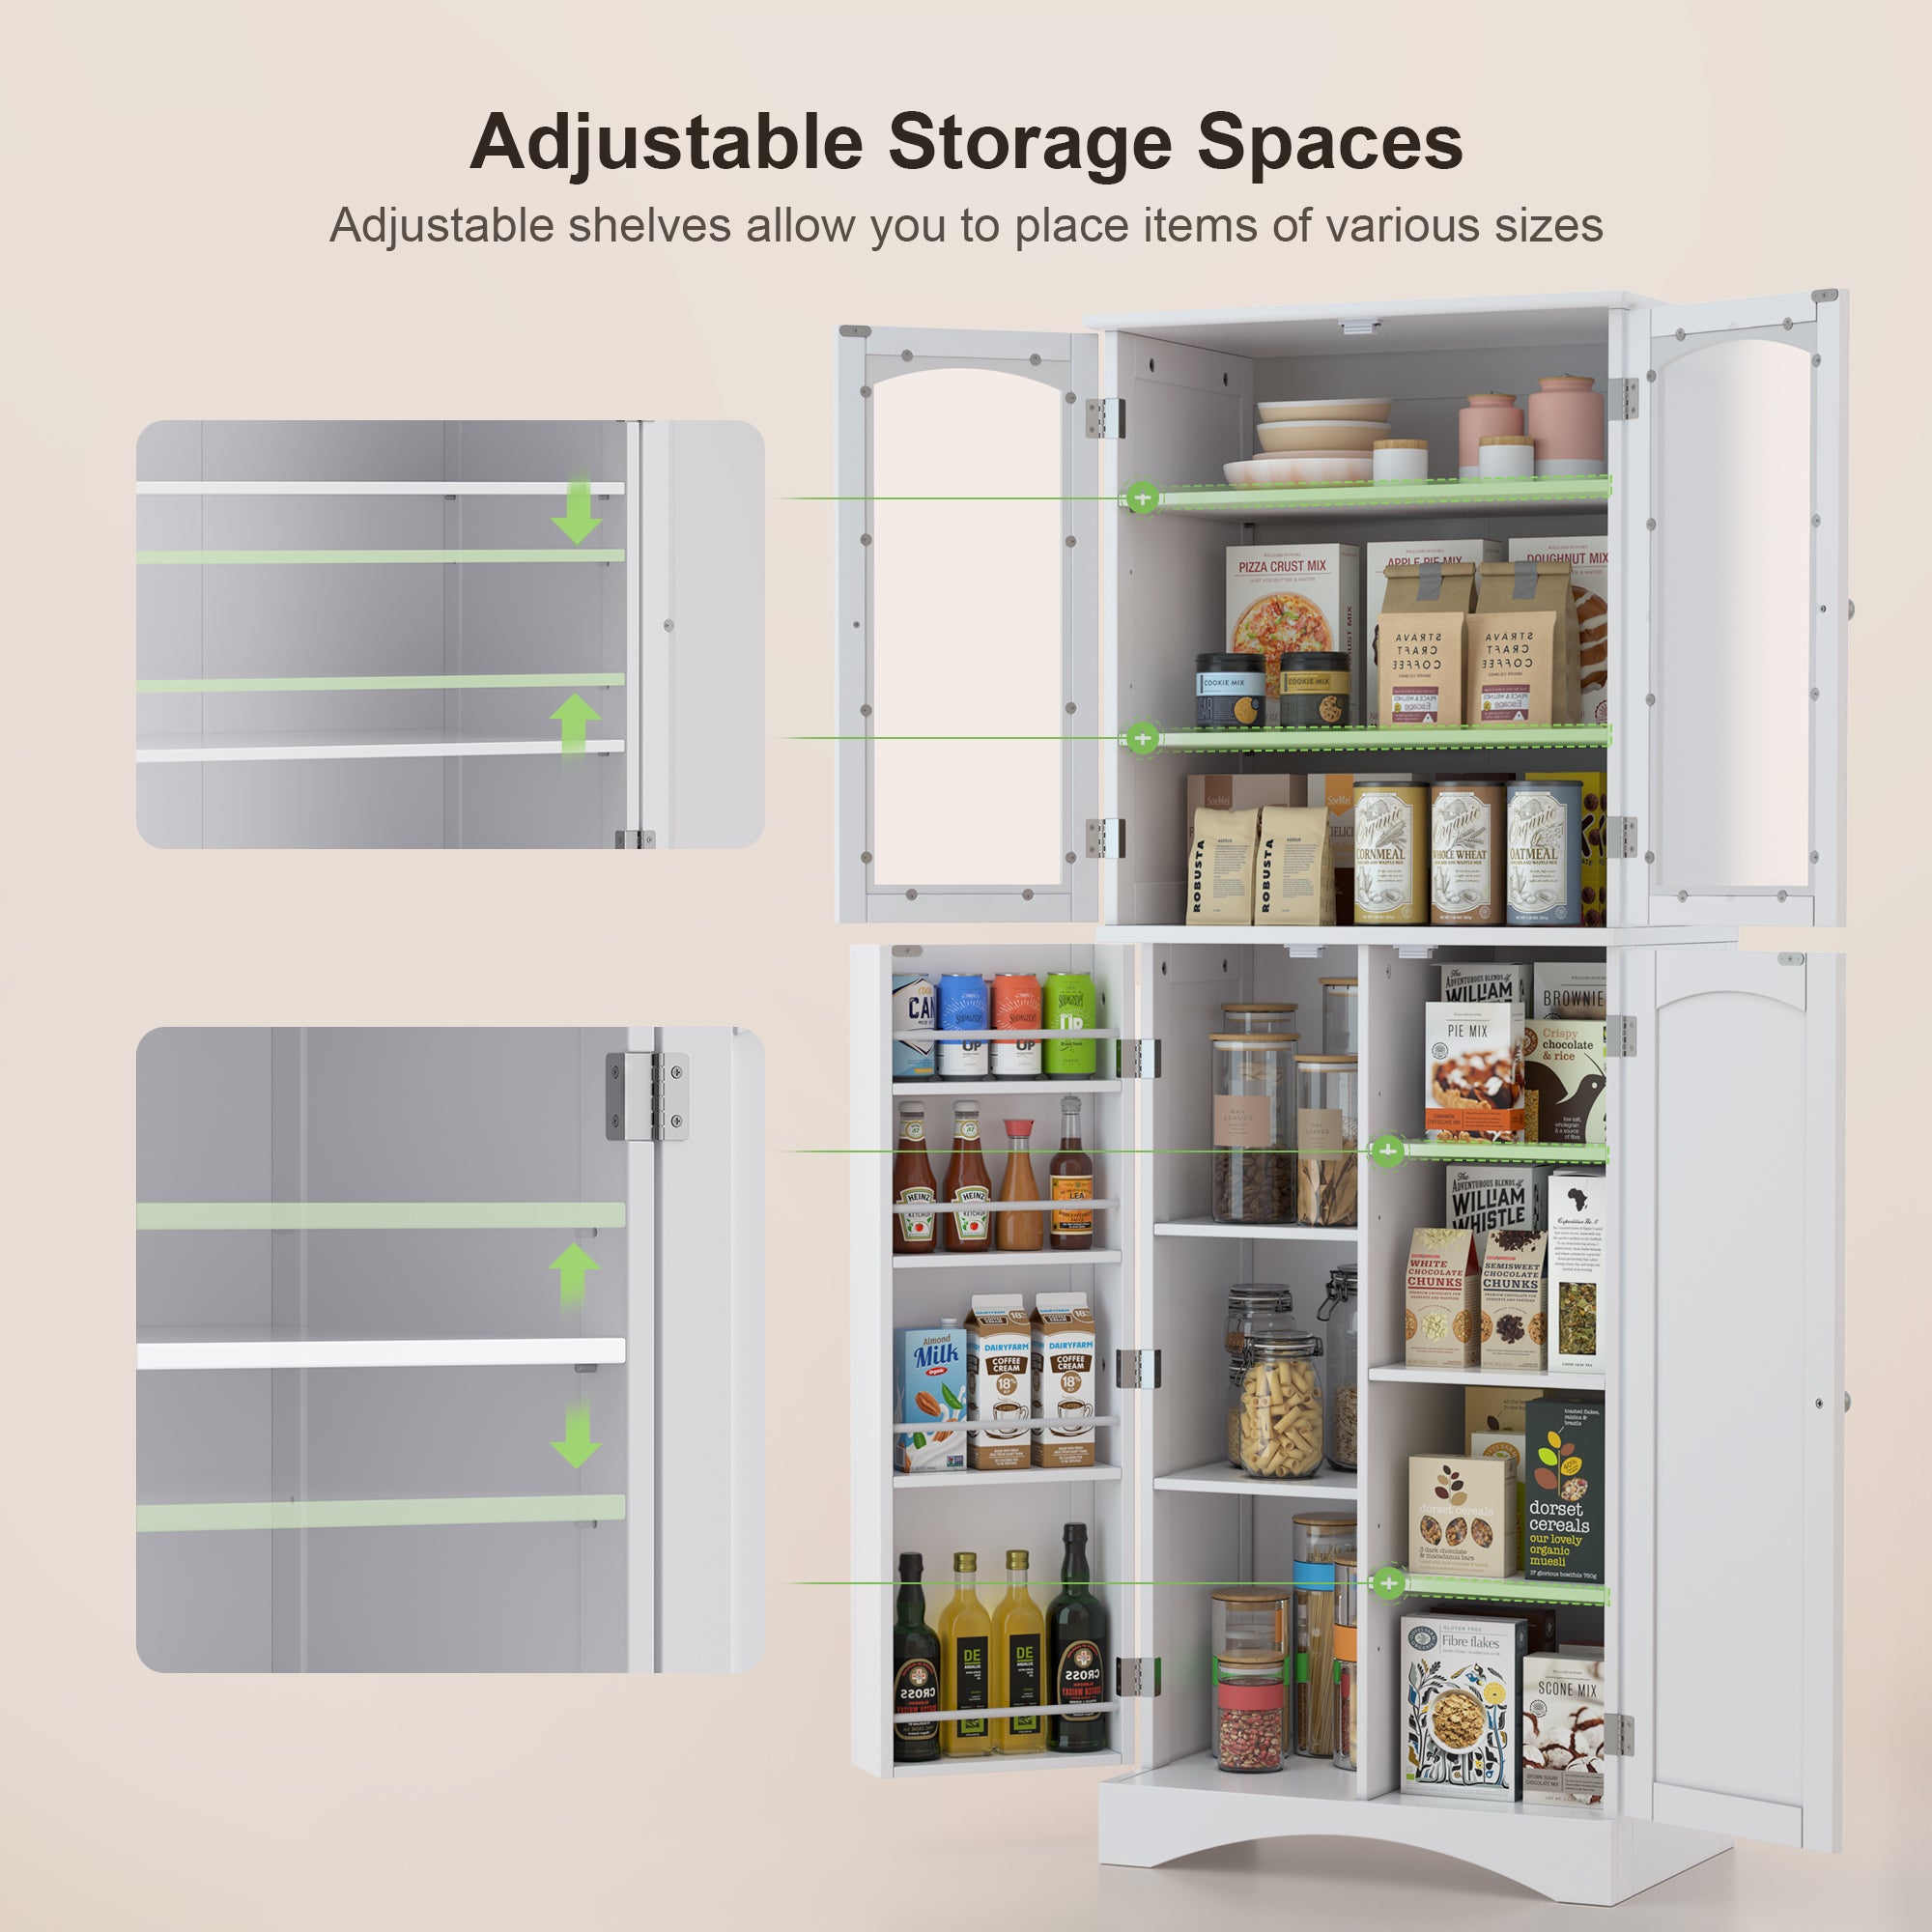 Gizoon AP31 64" Freestanding Kitchen Pantry Cabinet with Glass Doors and Adjustable Shelves